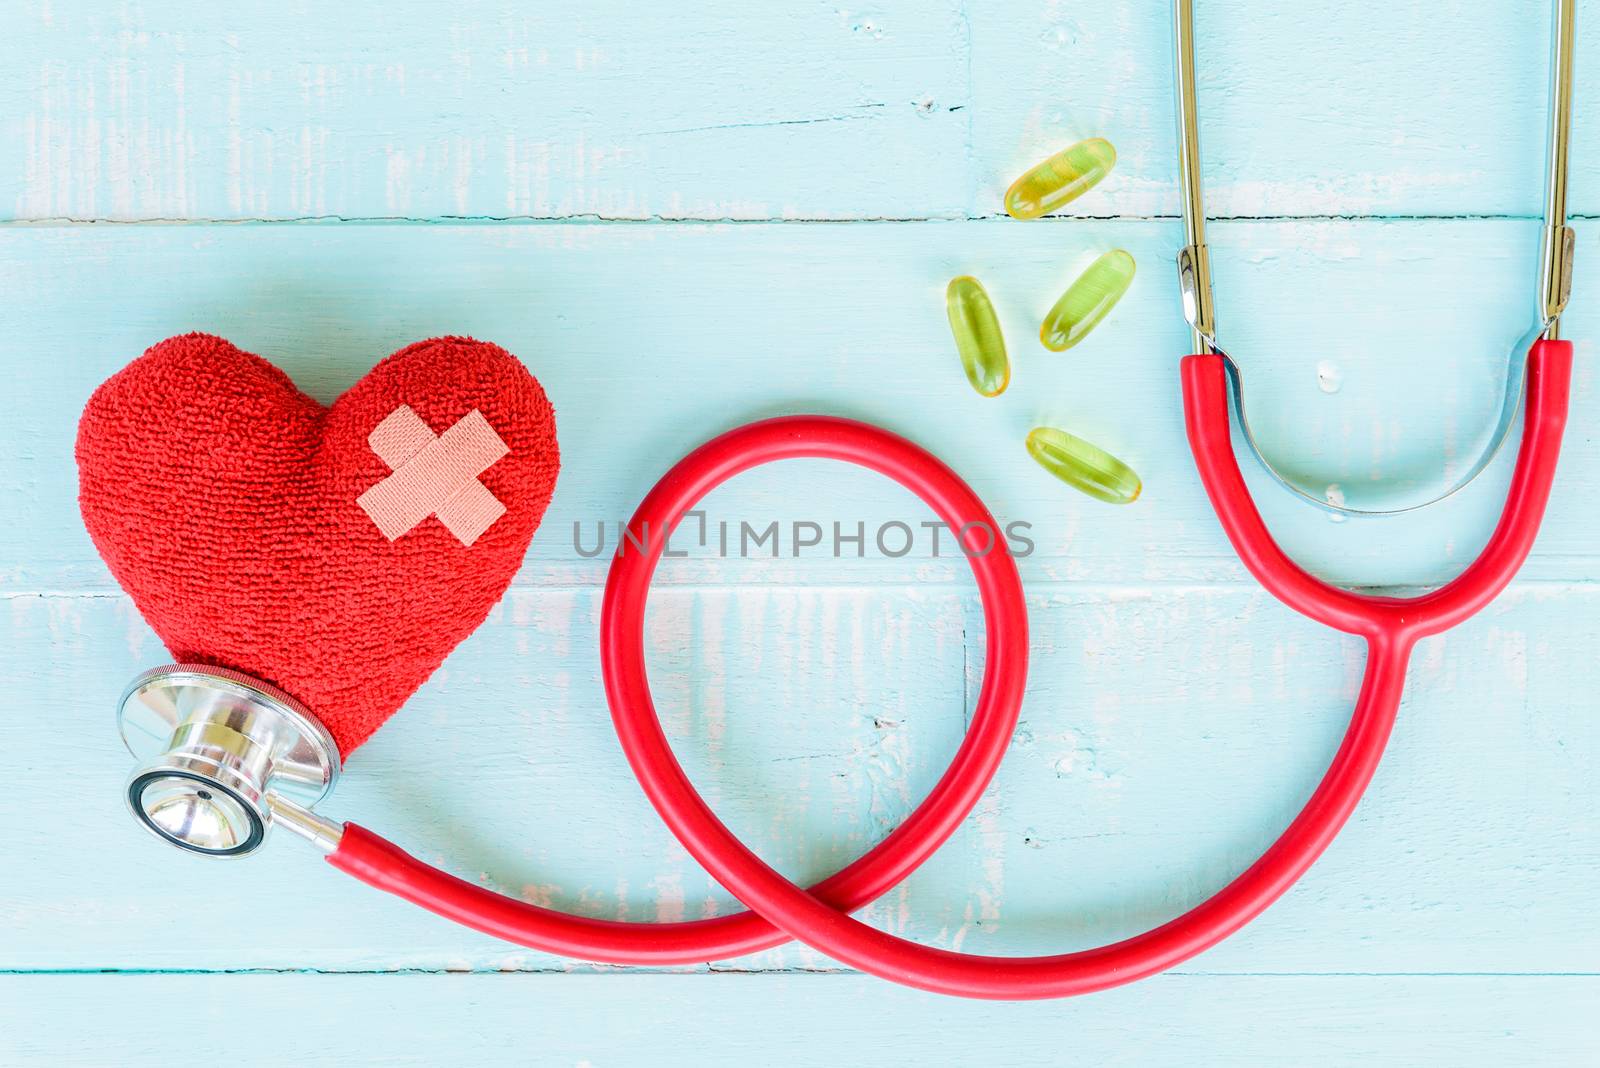 World health day, Healthcare and medical concept. Red heart with Stethoscope, thermometer and yellow Pill on Pastel white and blue wooden table background texture.